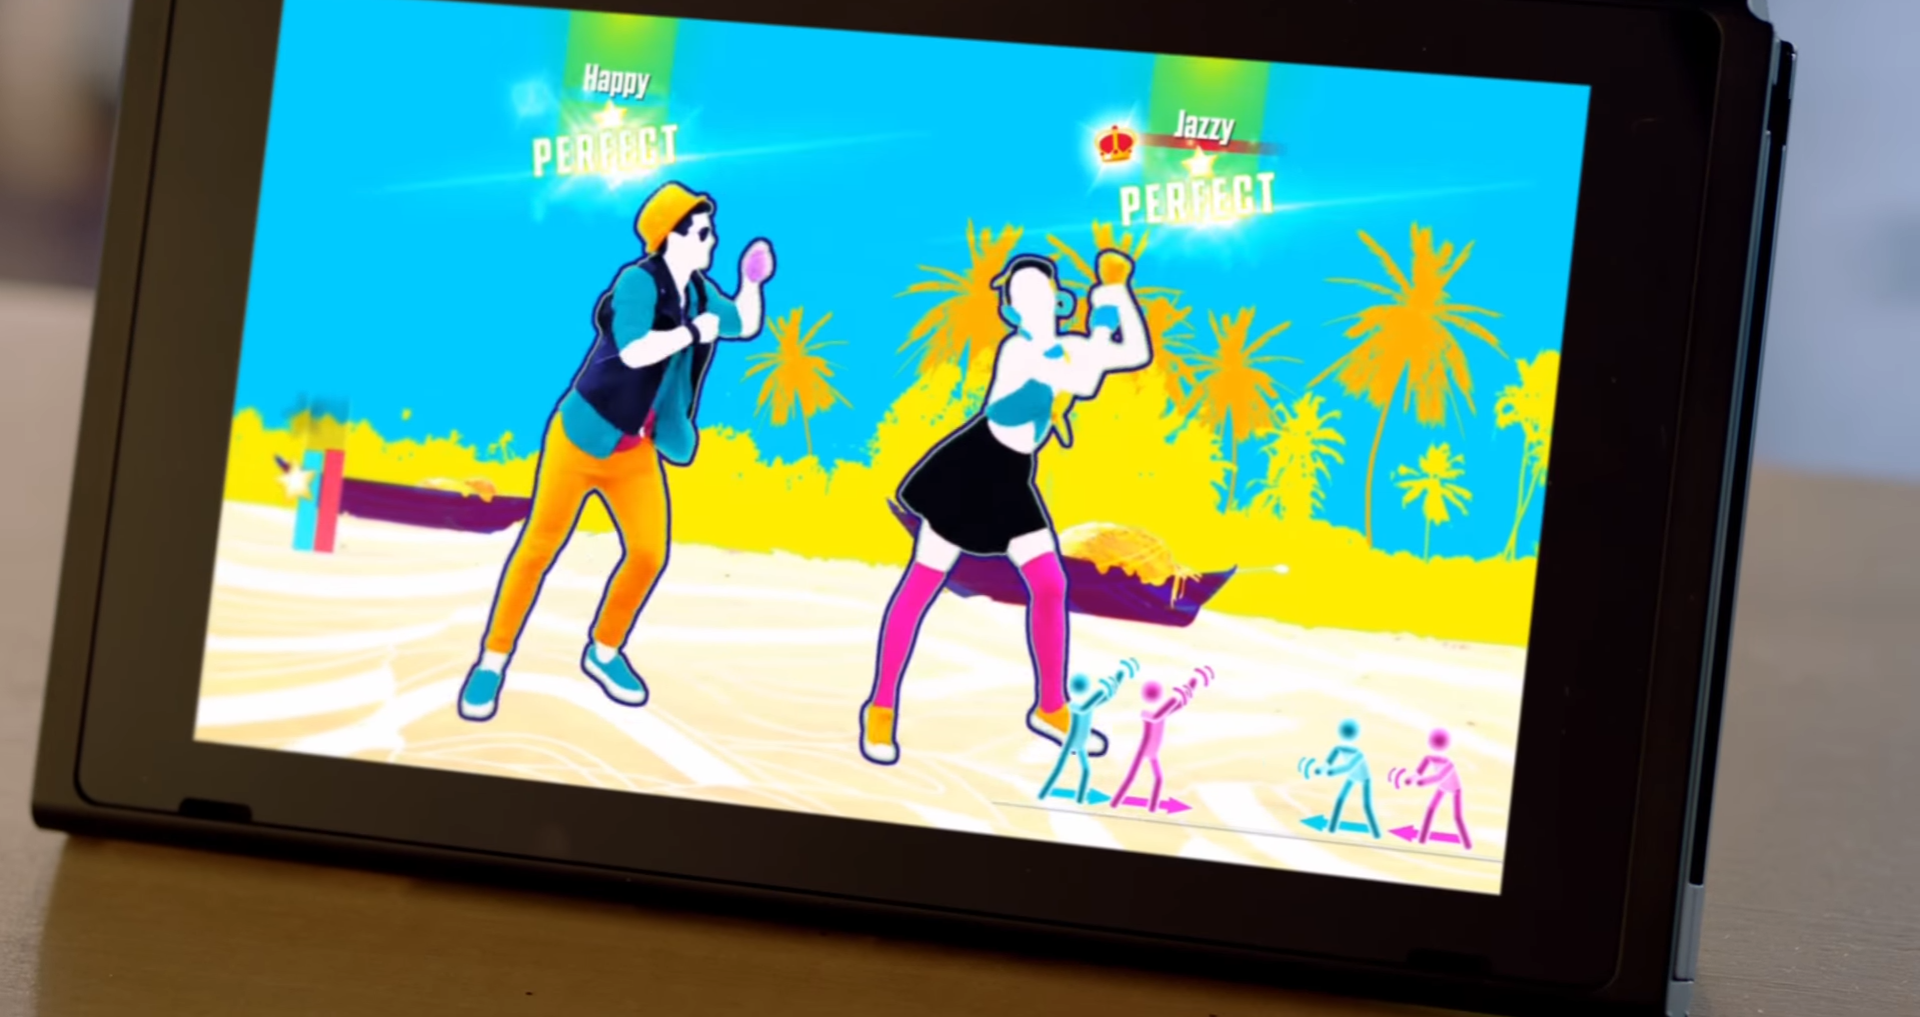 free download just dance 4 nintendo switch